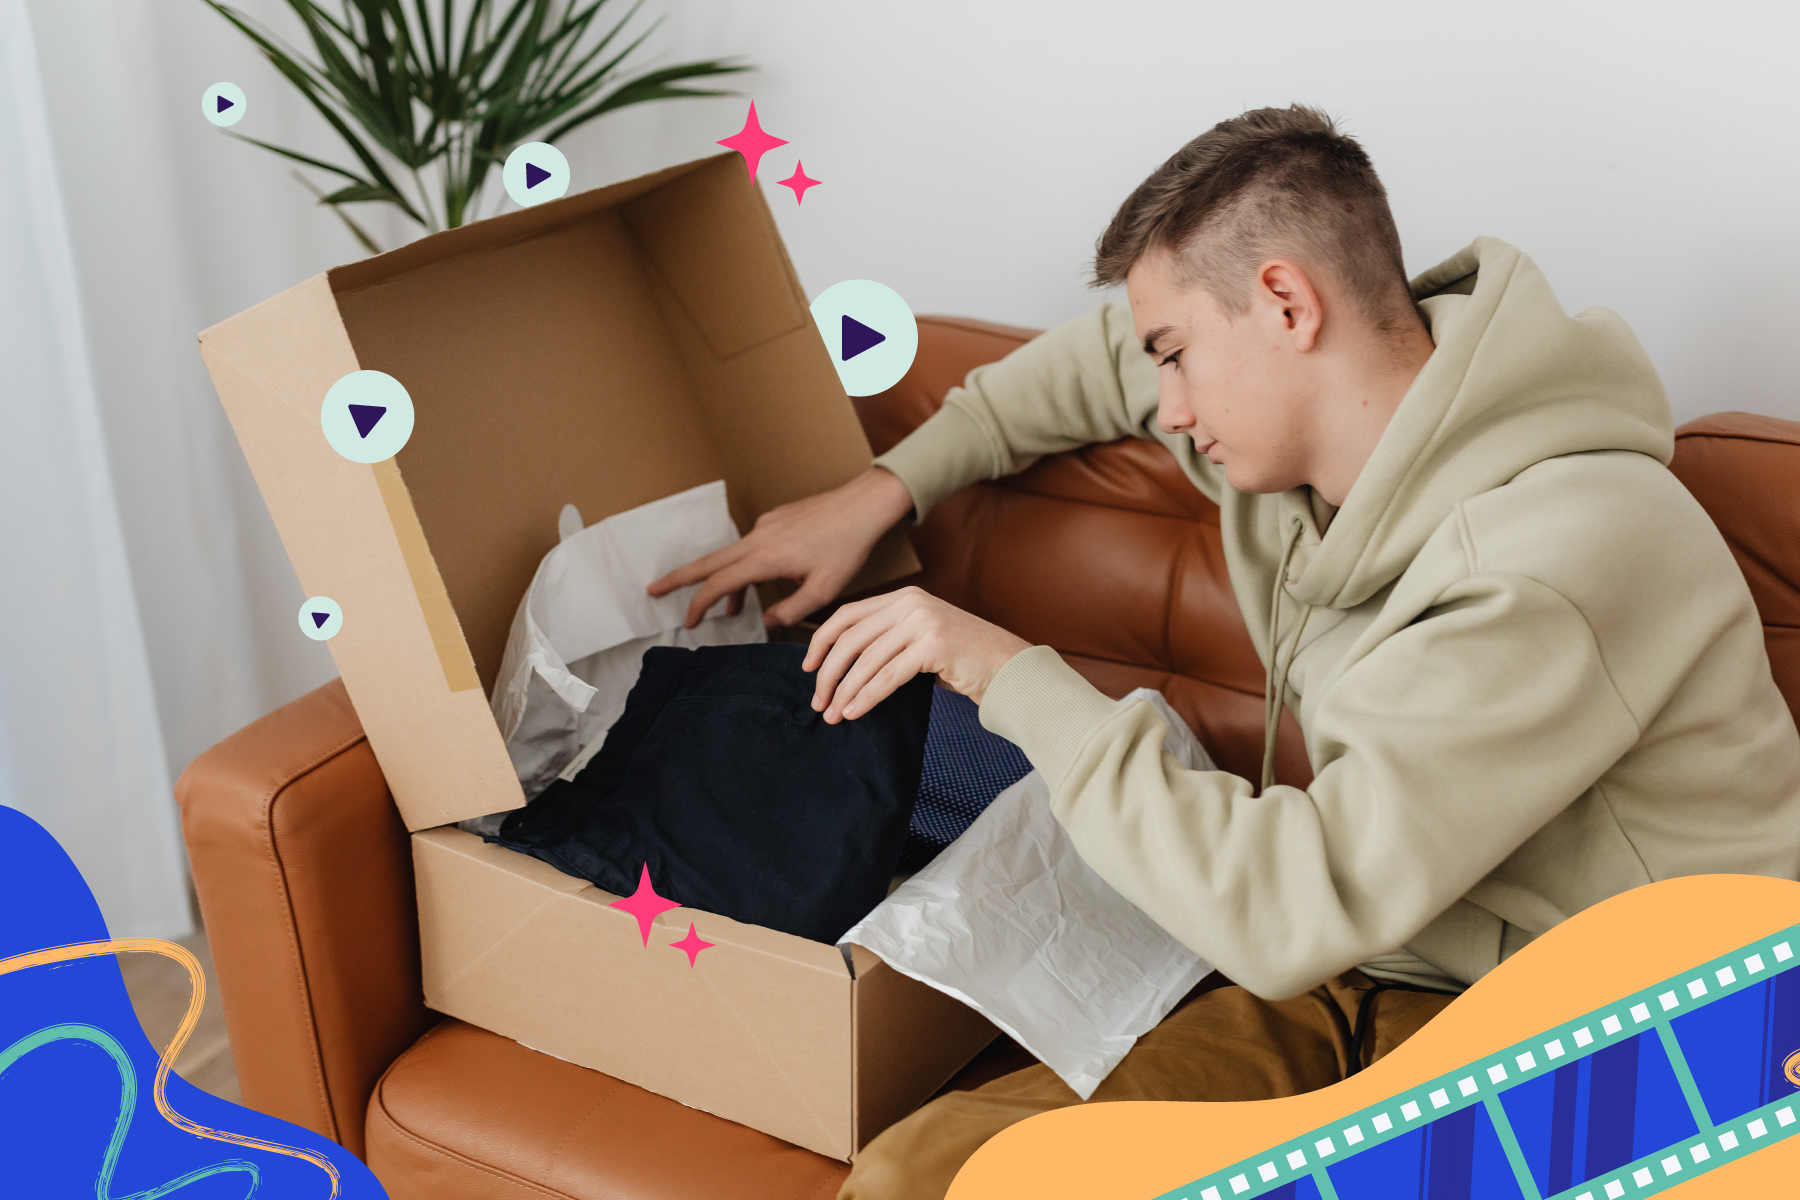 17 Proven Tips For A Great Unboxing Video in 2021